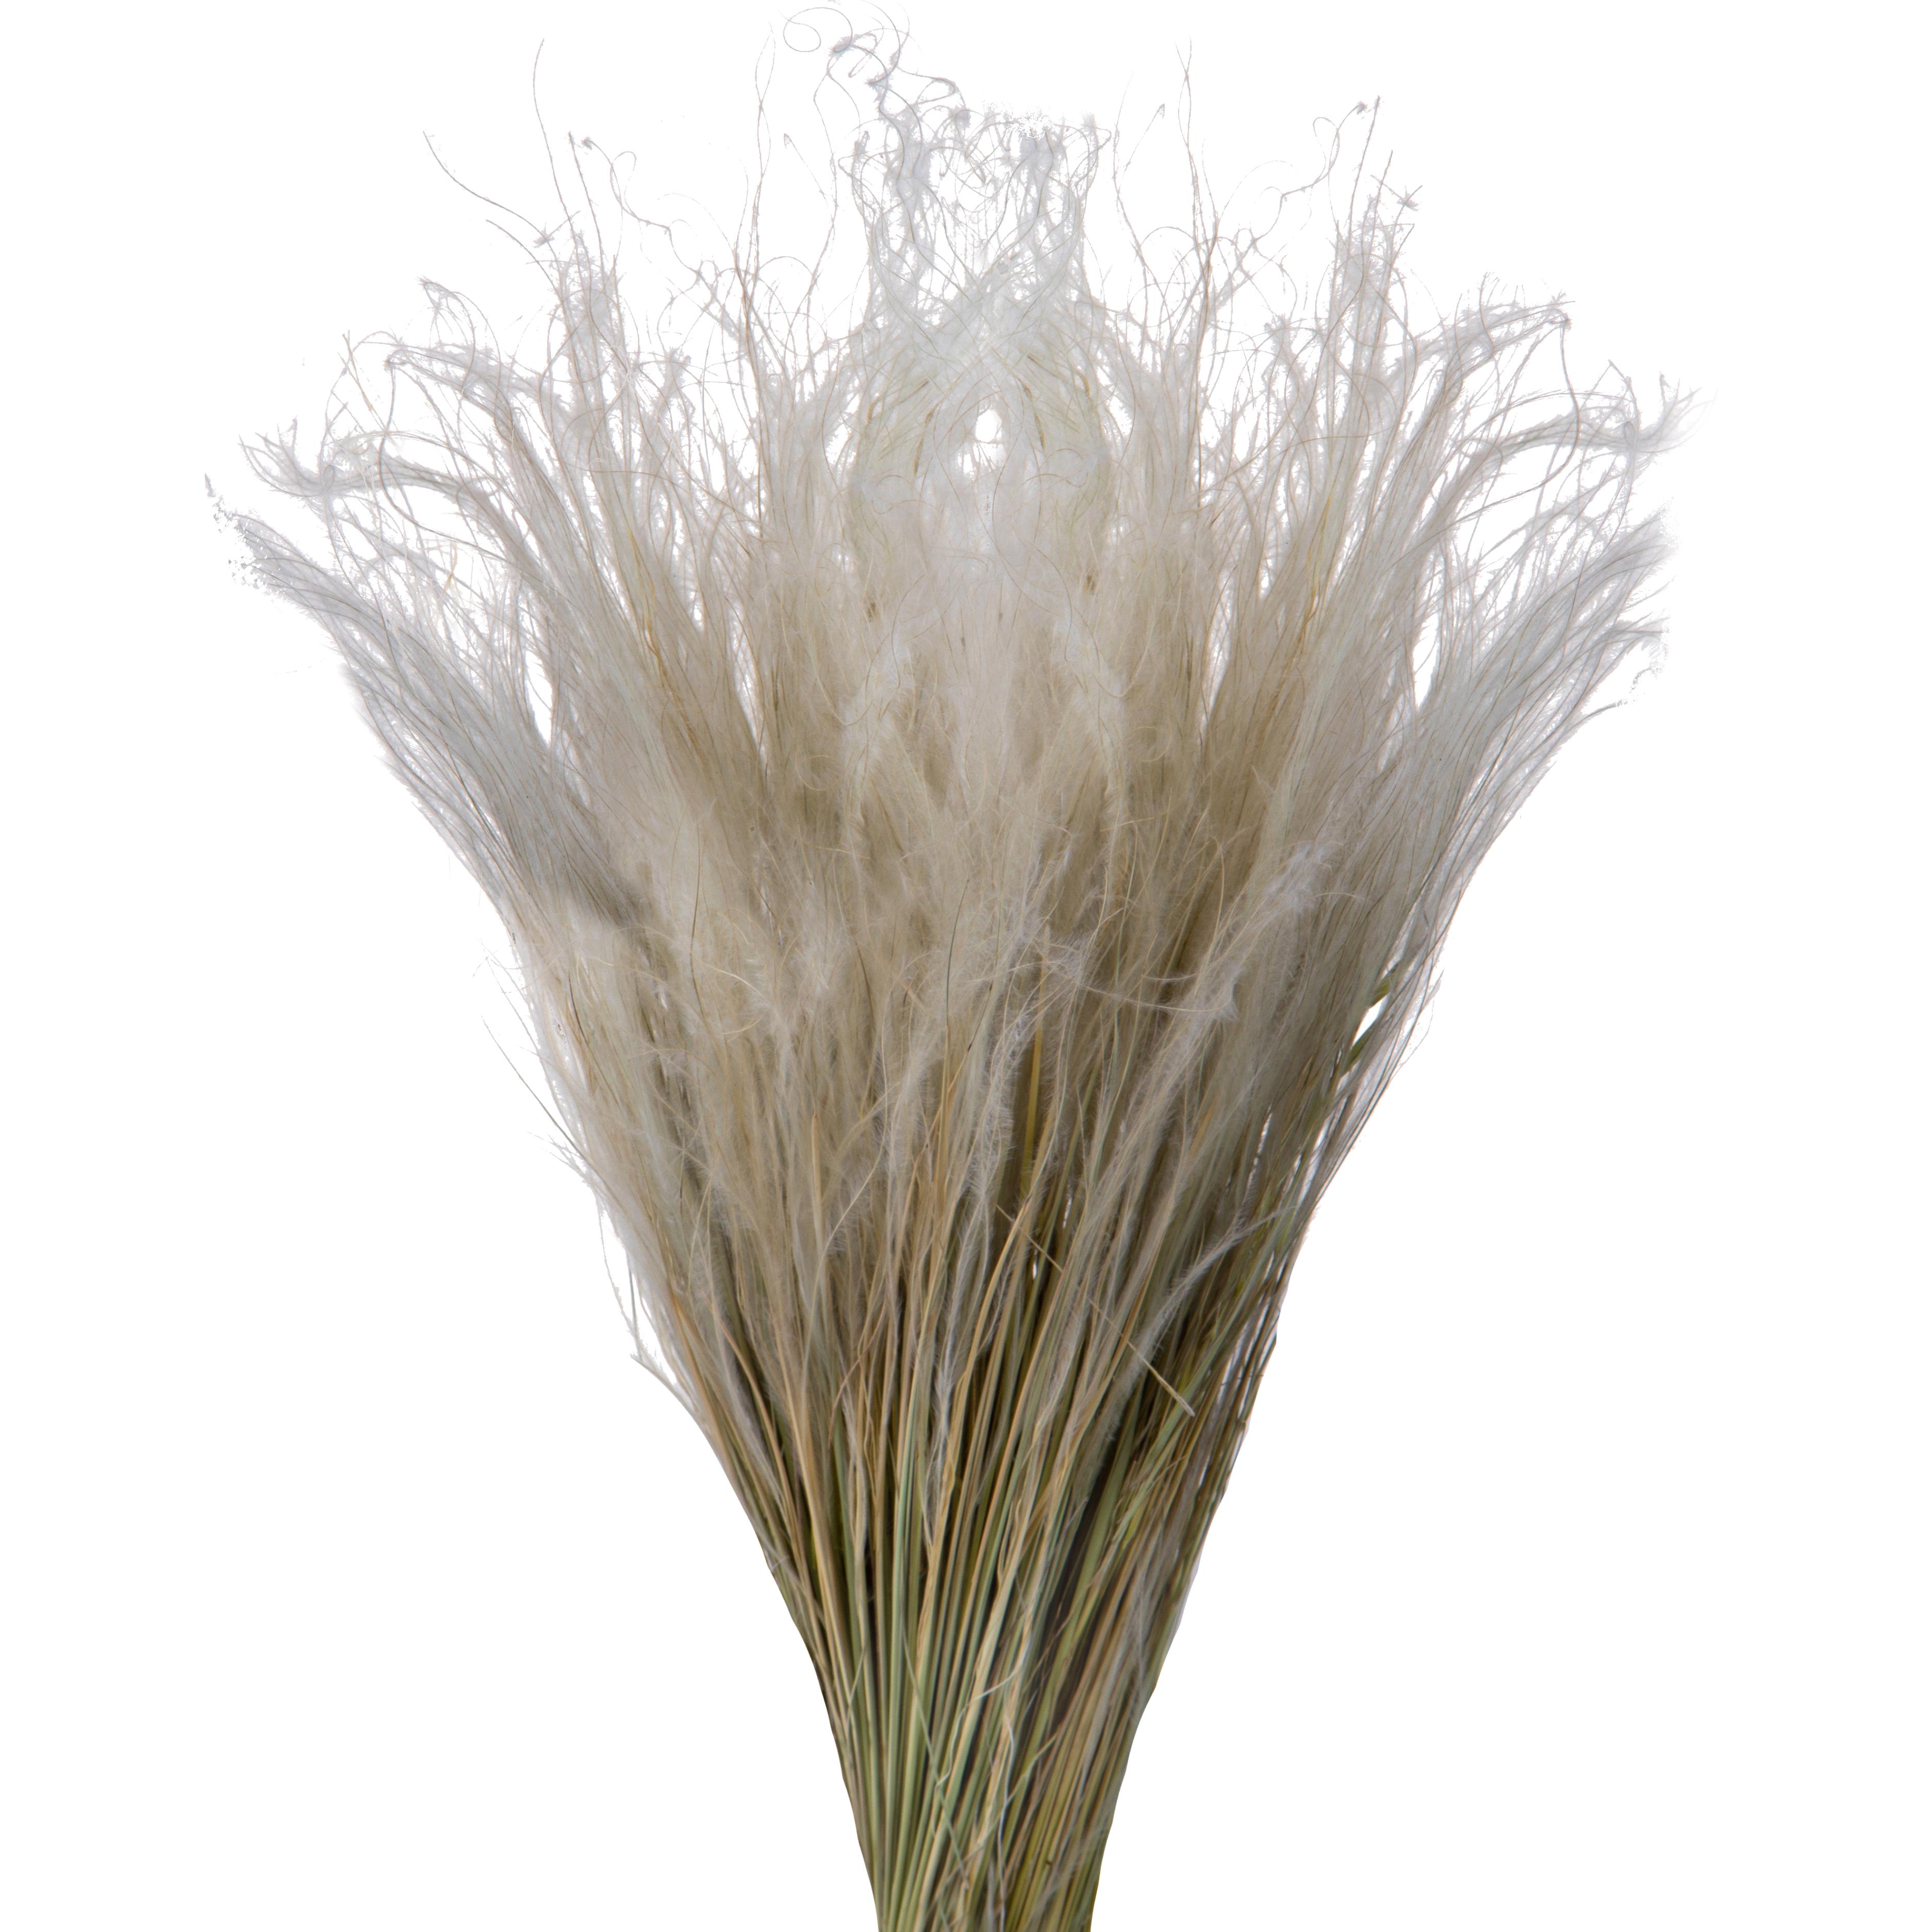 NATURAL PRODUCTS DRIED FLOWERS AND ERBS, FLOWERS, FRUITS AND NATURAL PROTEES, STIPA PENNATA NAT. A KG